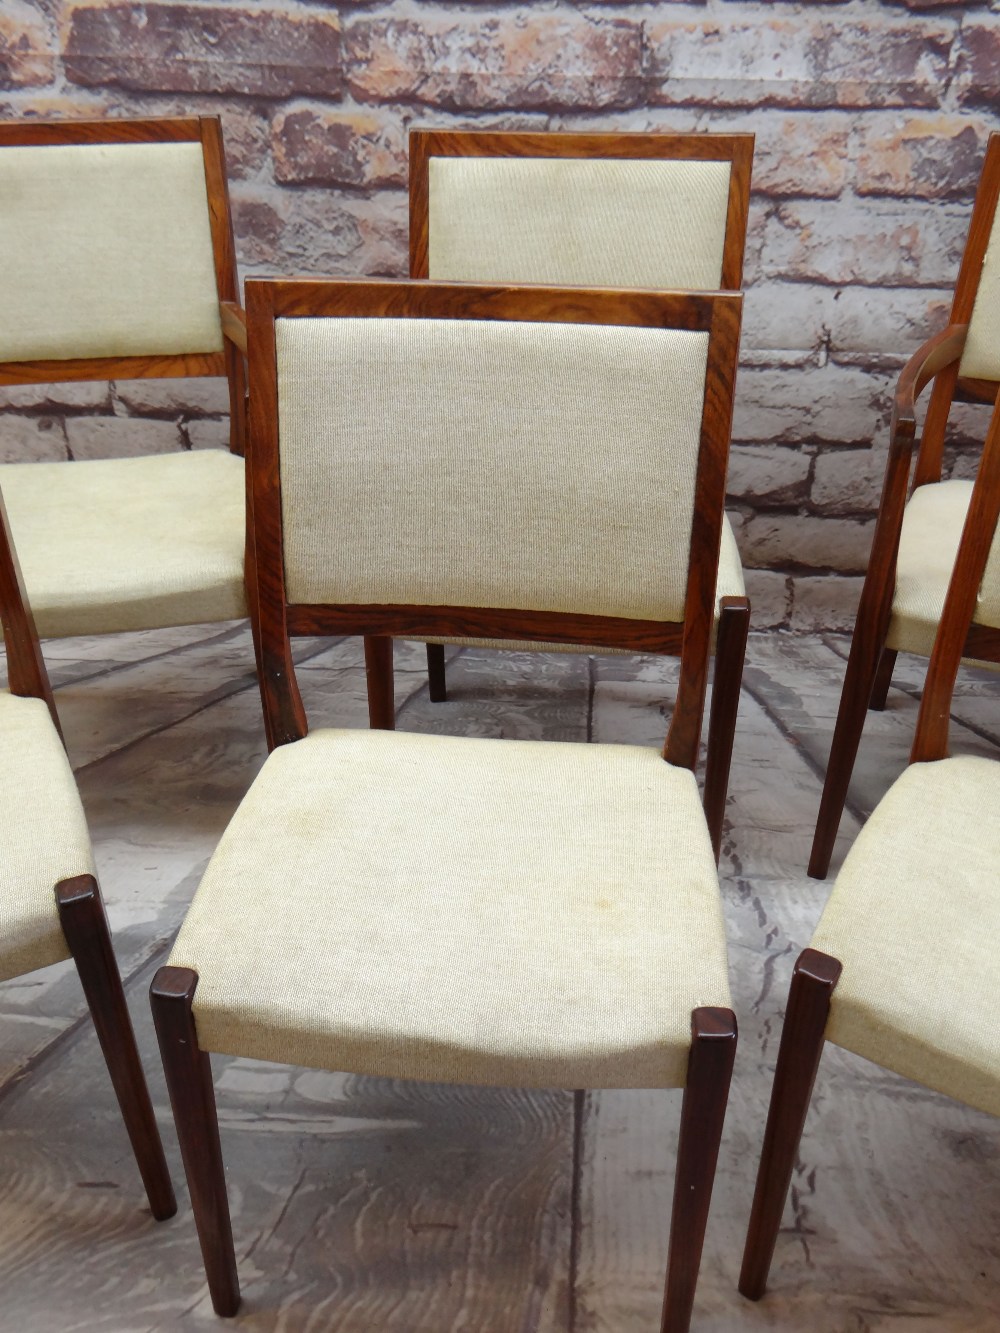 SET OF SIX SWEDISH 'SVEGARDS' DINING CHAIRS with pale gold woven stuff-over seats and backs, - Image 3 of 4